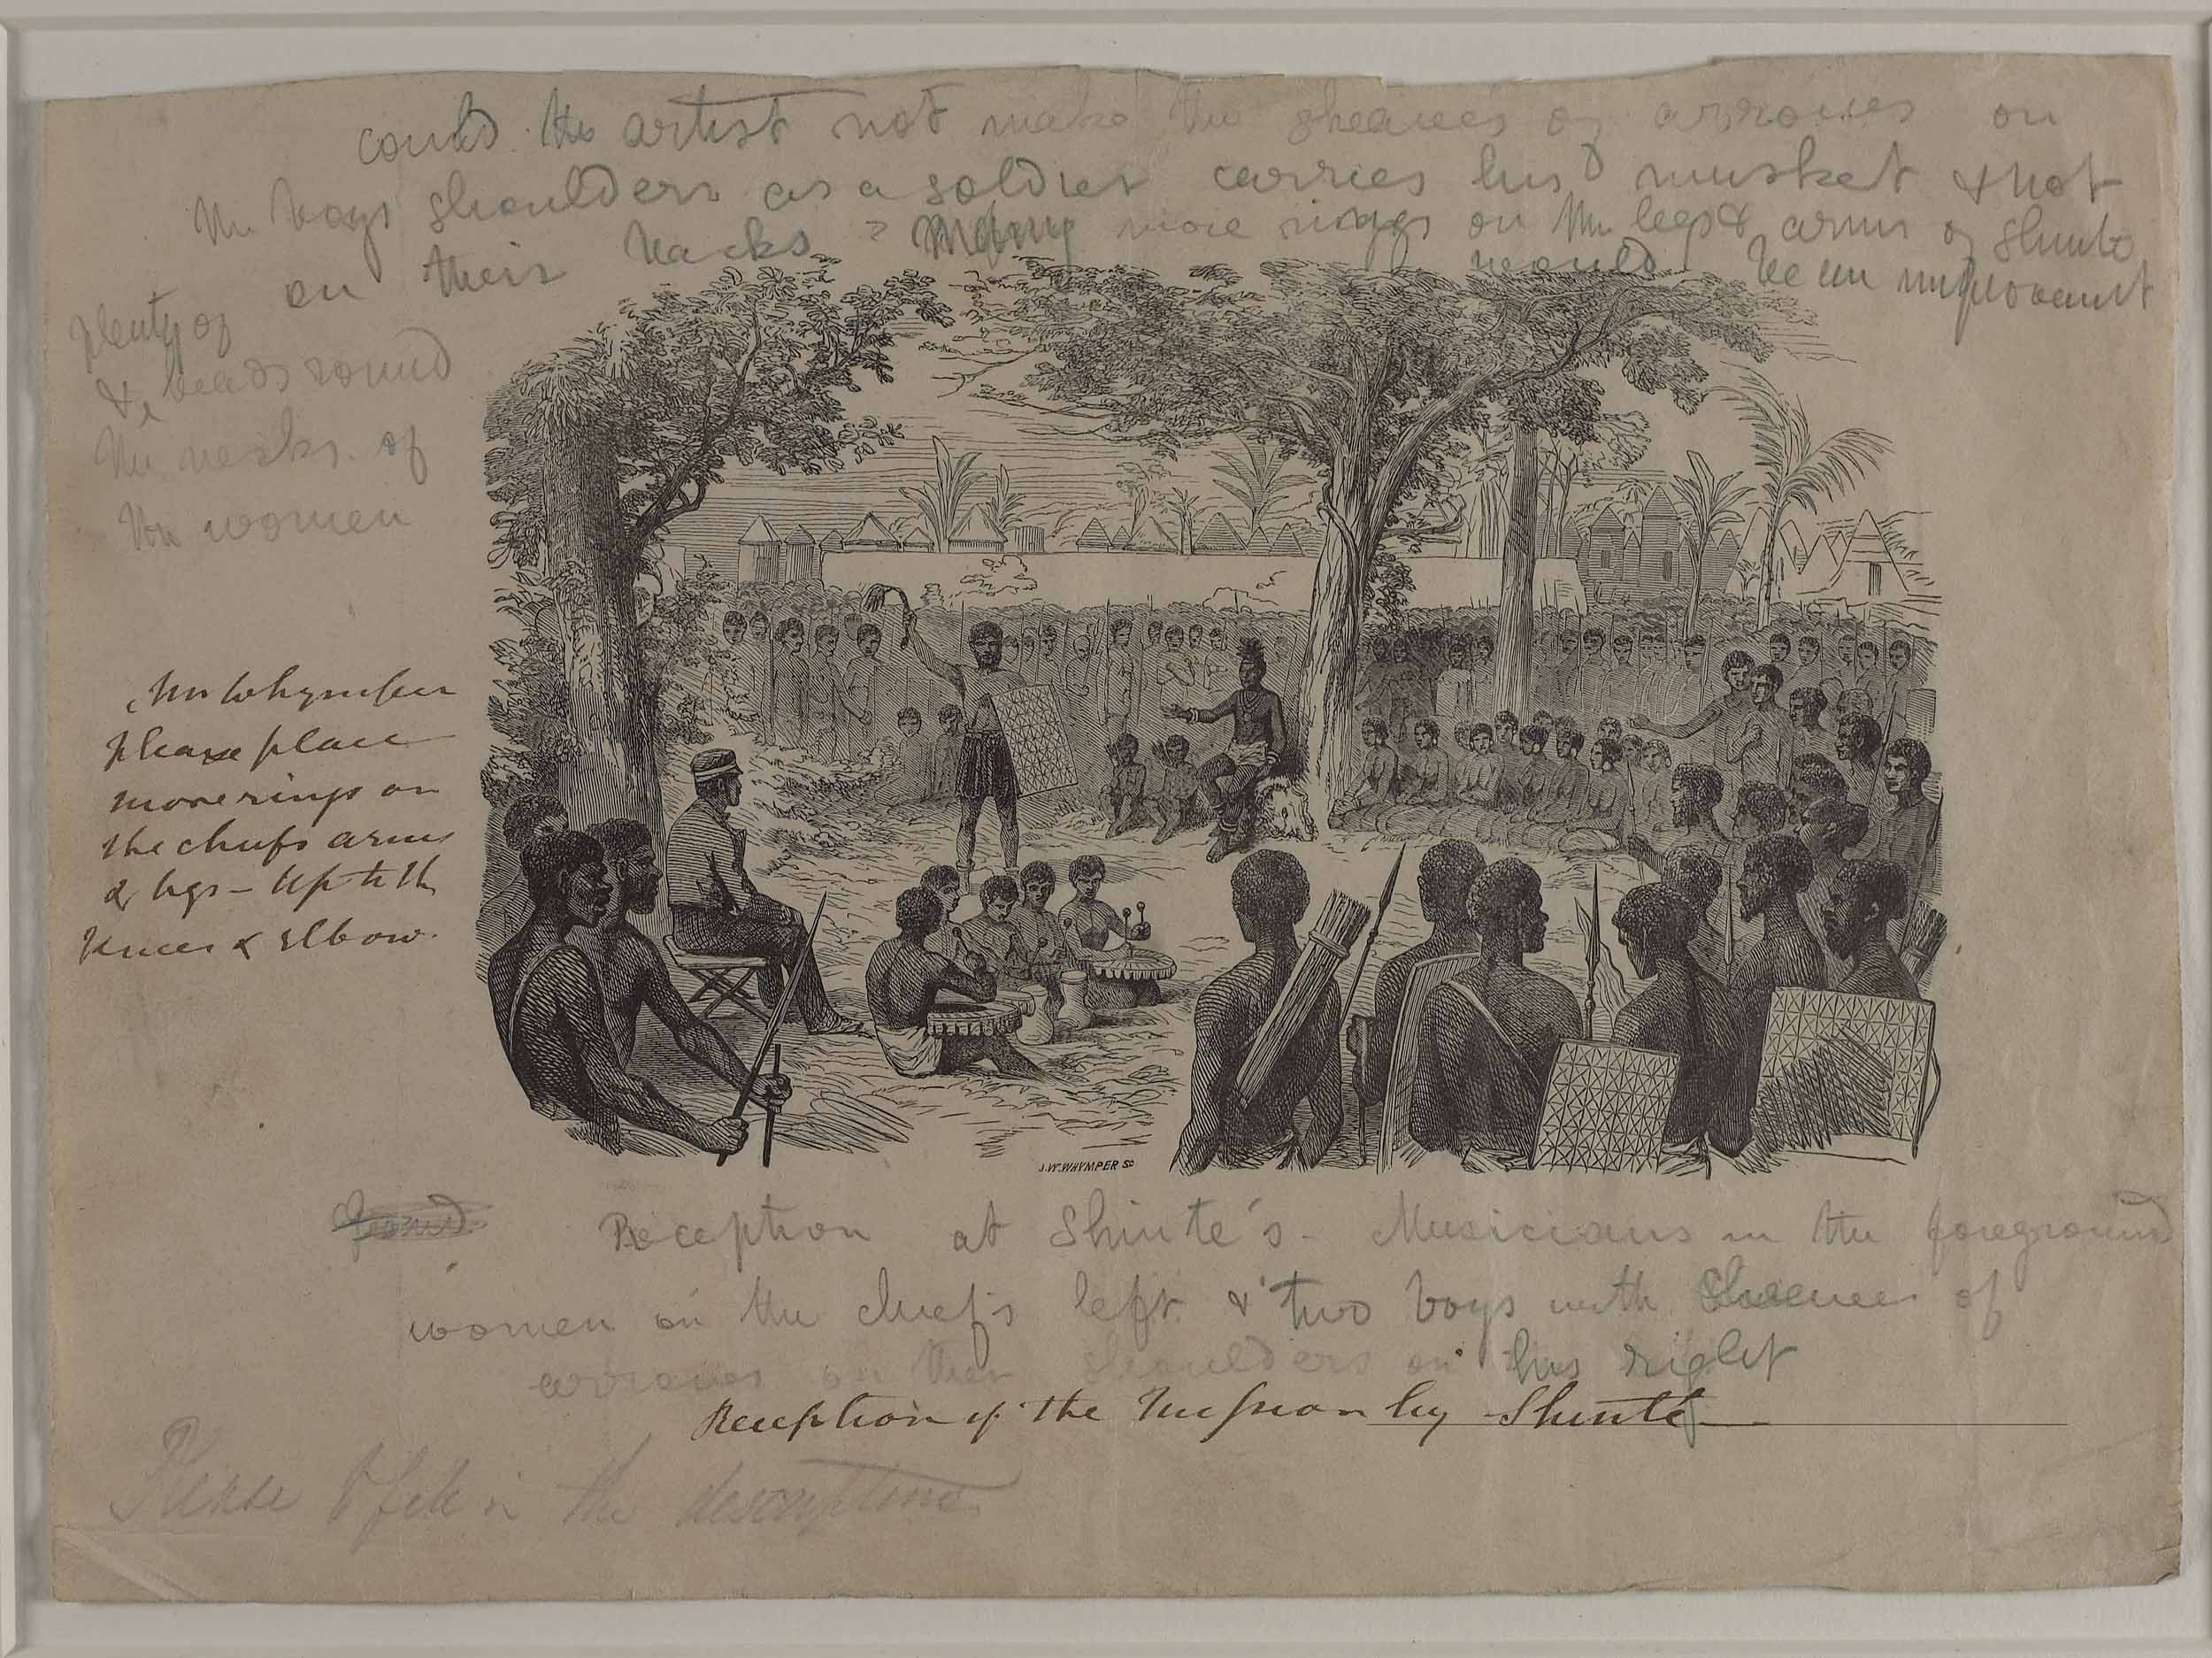 Reception of the mission by Shinte (David Livingstone's Annotated Proof, MS. 42432), 1856-1857. Copyright National Library of Scotland. Creative Commons Share-alike 2.5 UK: Scotland license (https://creativecommons.org/licenses/by-nc-sa/2.5/scotland/).